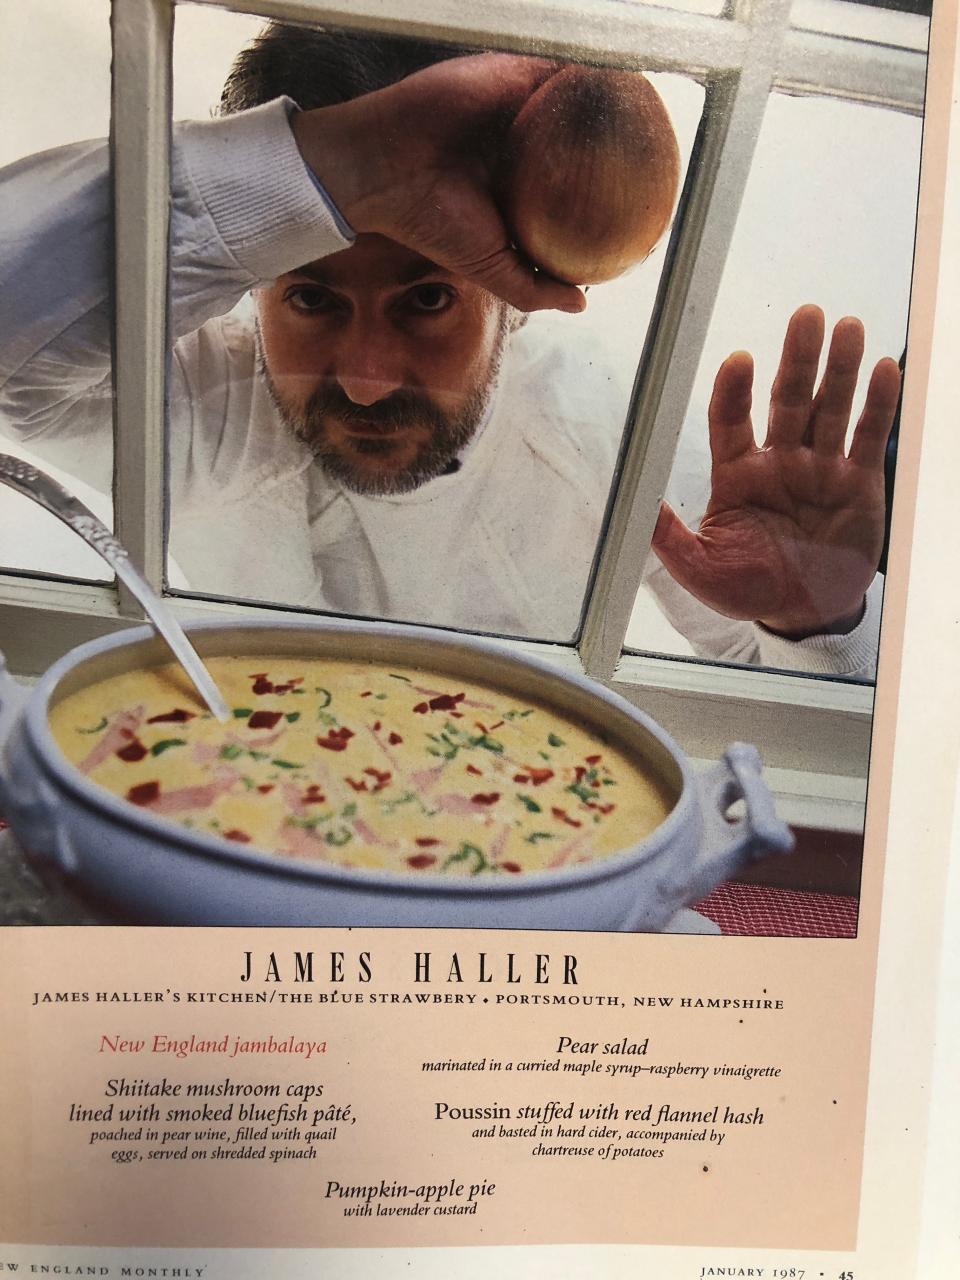 New England jambalaya is pictured in this January 1987 New England Monthly piece on a chef James Haller menu.